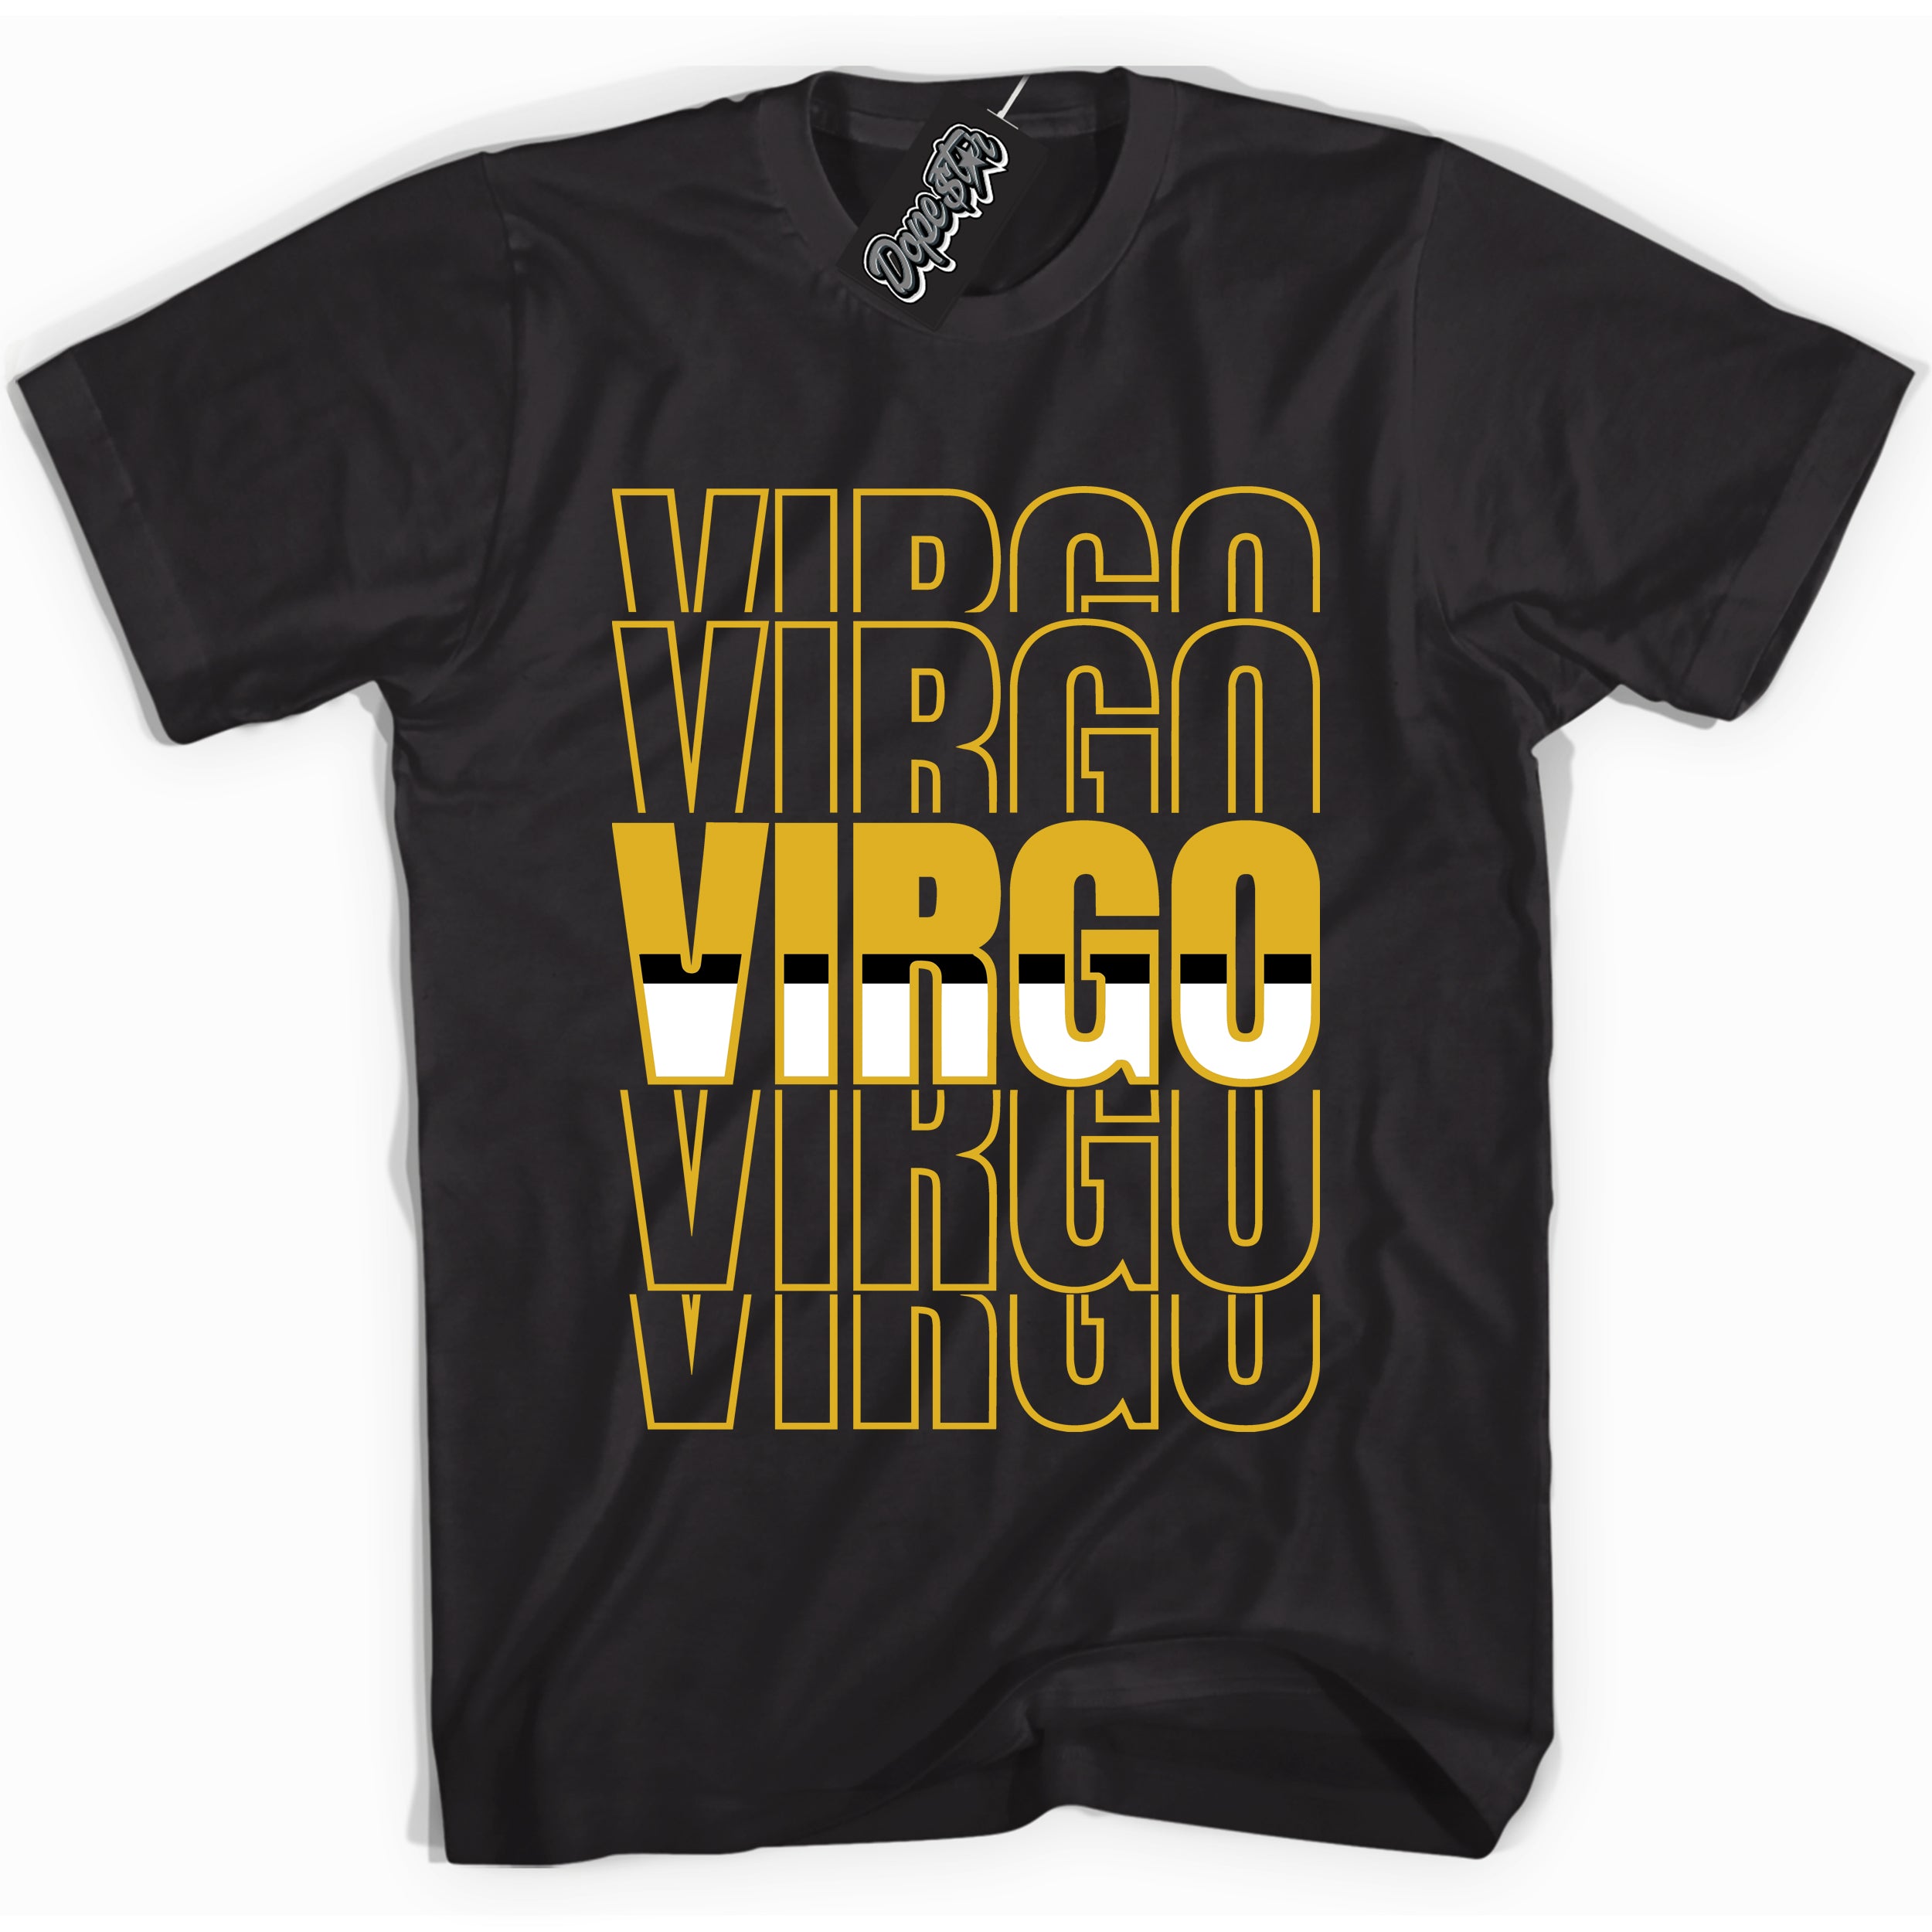 Cool black Shirt with “ Virgo” design that perfectly matches Yellow Ochre 6s Sneakers.